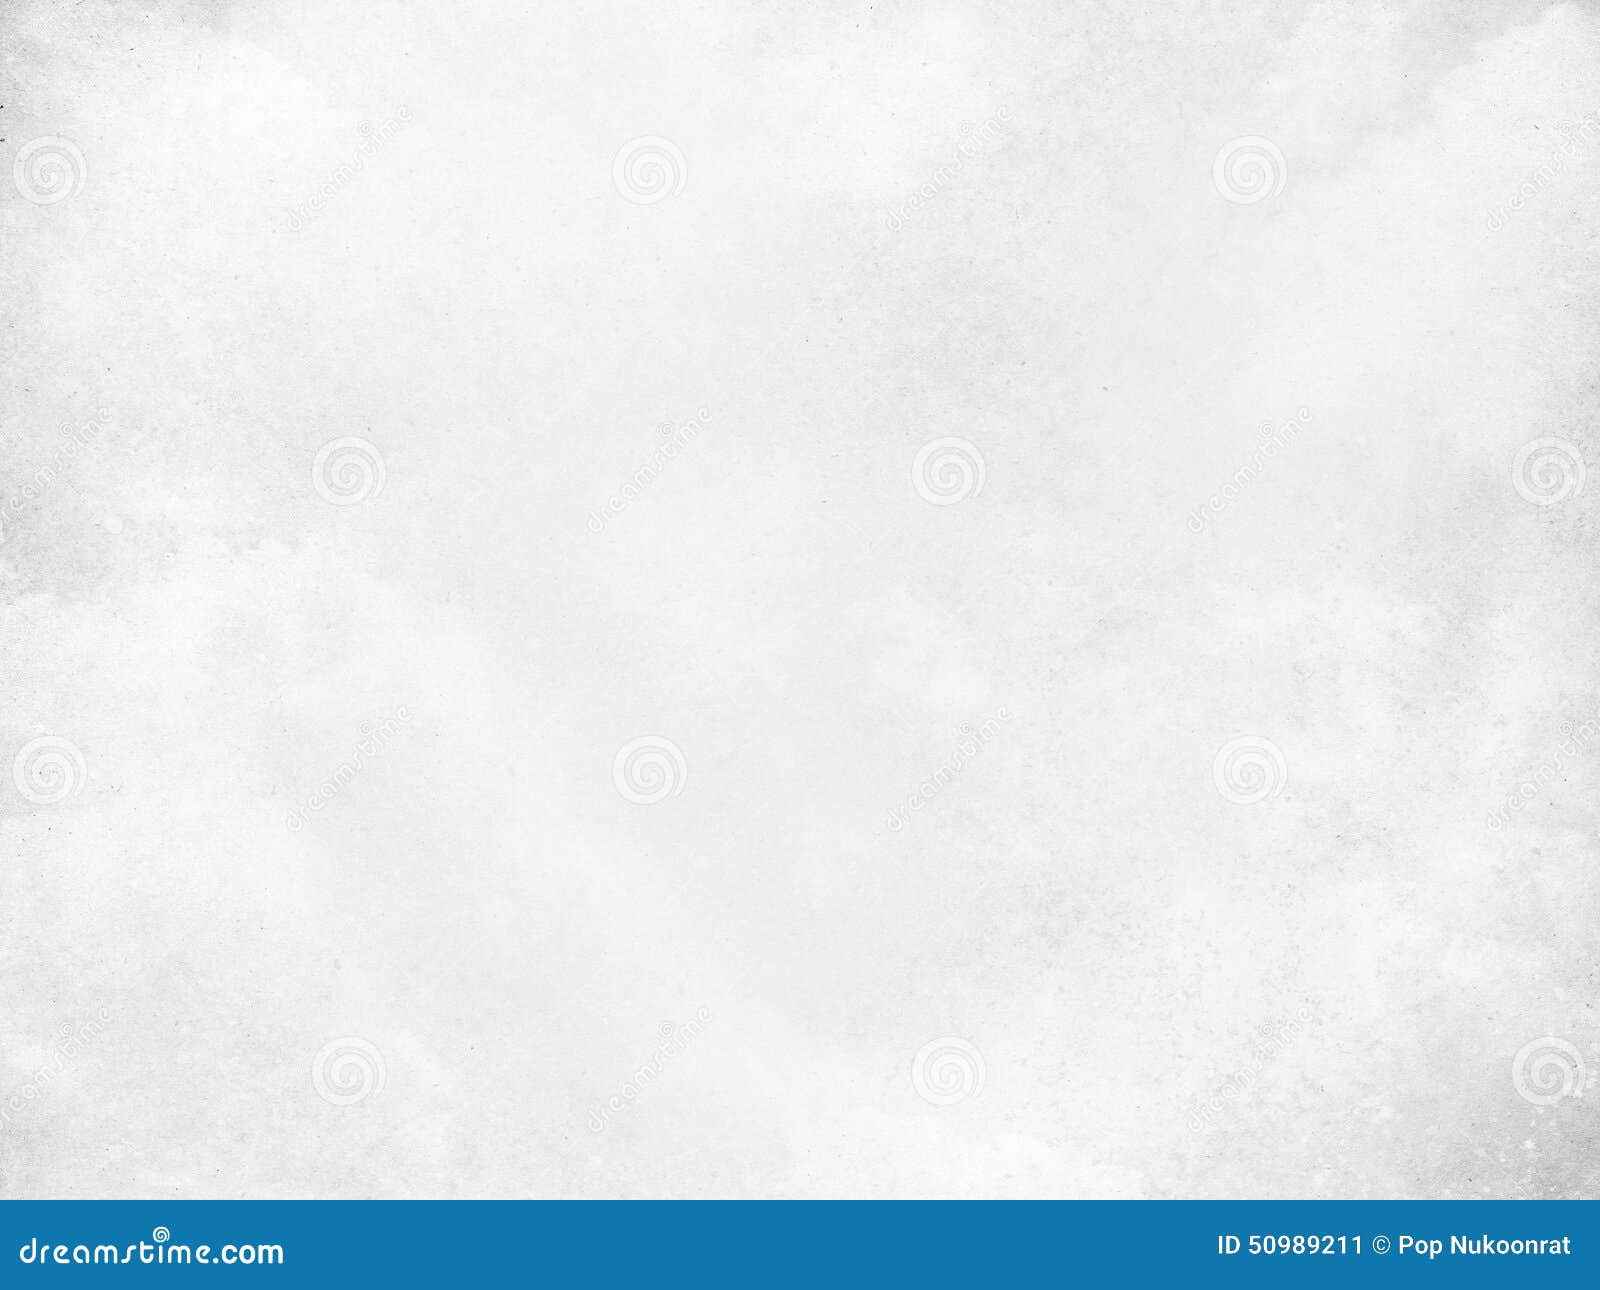 White Old Paper Grunge Texture for Background Stock Image - Image ...